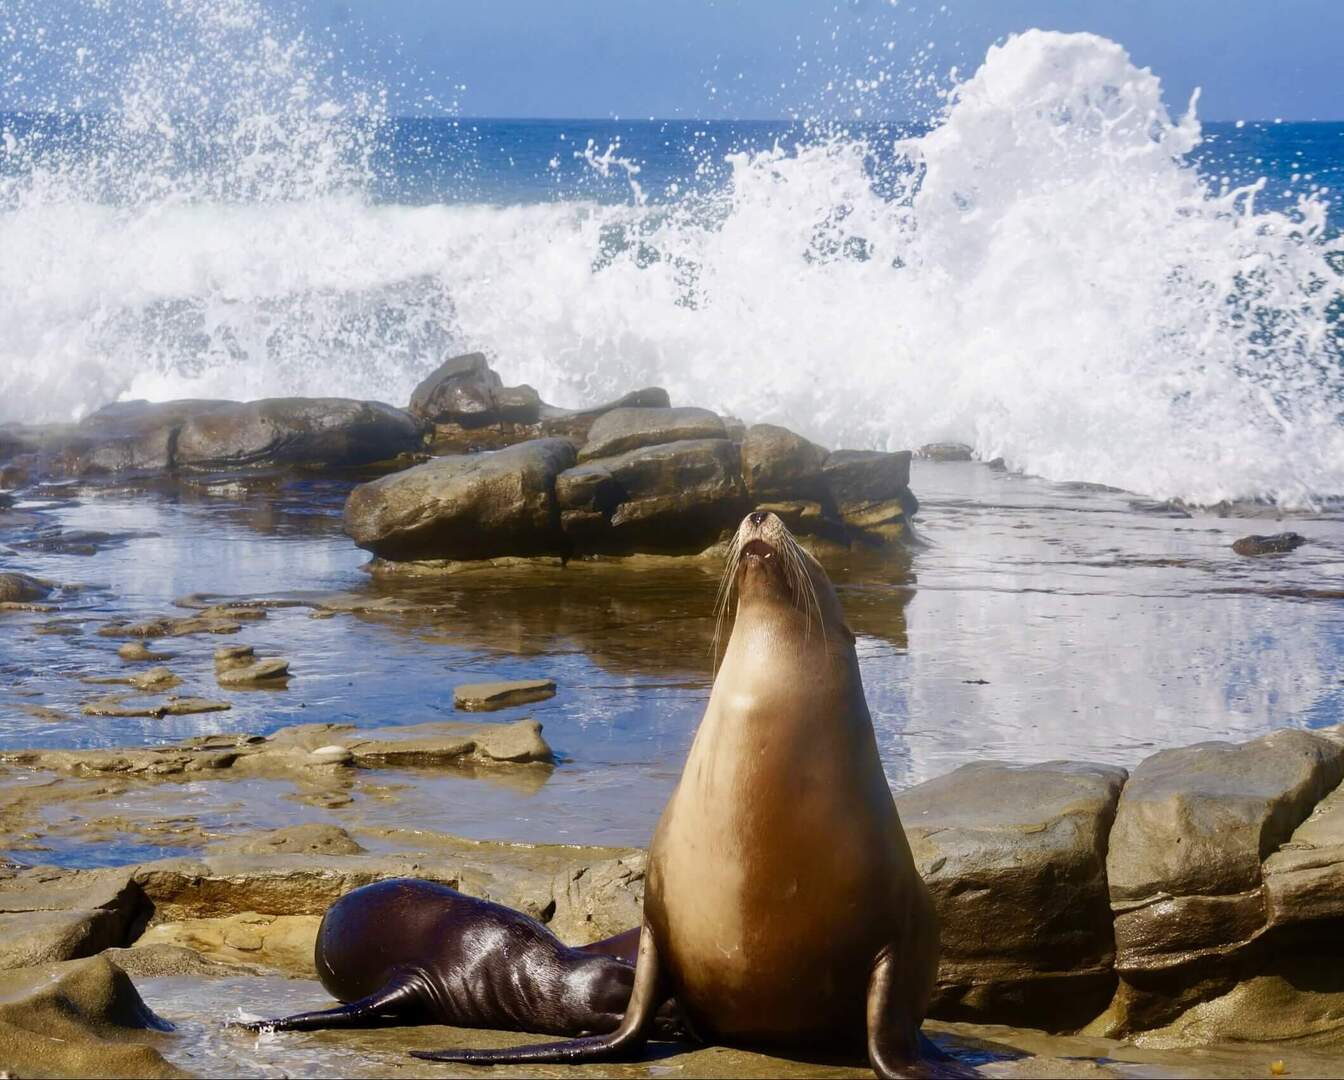 Two seals sit on wet rocks with waves crashing behind them